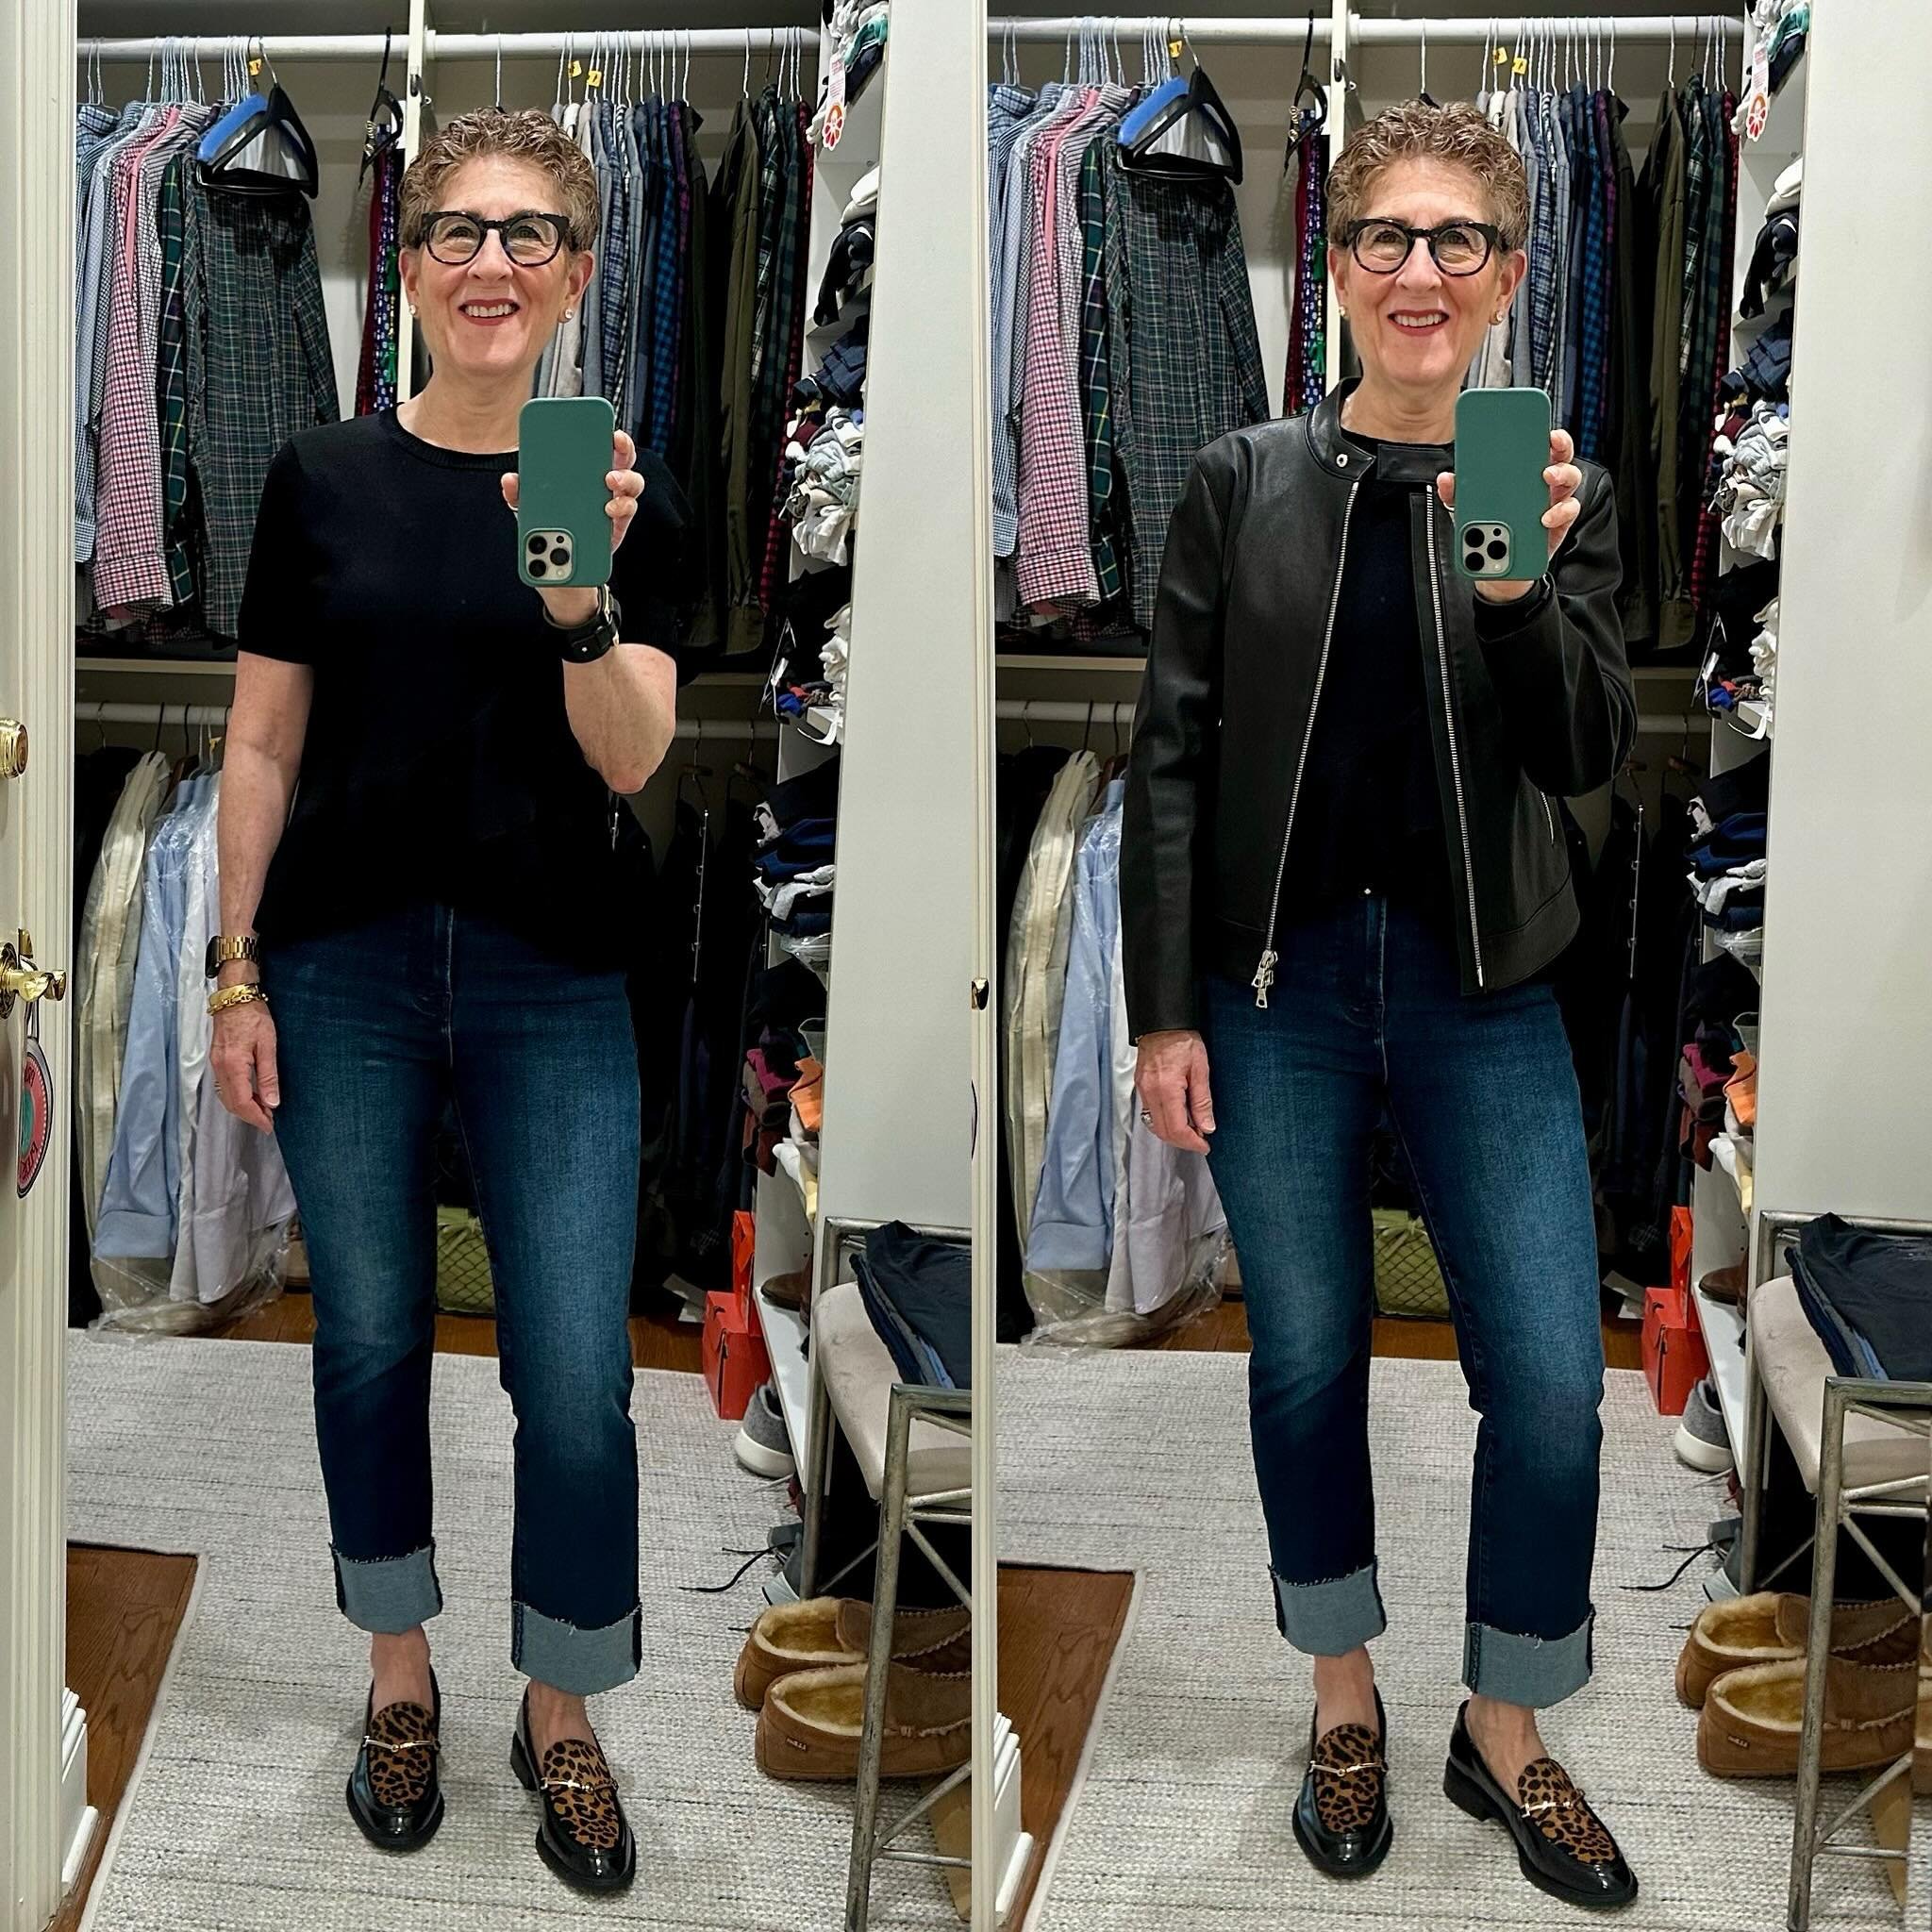 I&rsquo;m feeling very French today, in my black and denim look. Showing you the indoors version + the outdoors one&mdash;where I added a black leather jacket. 
French style is simple, classic, well cut, and with small but impactful details. Somethin